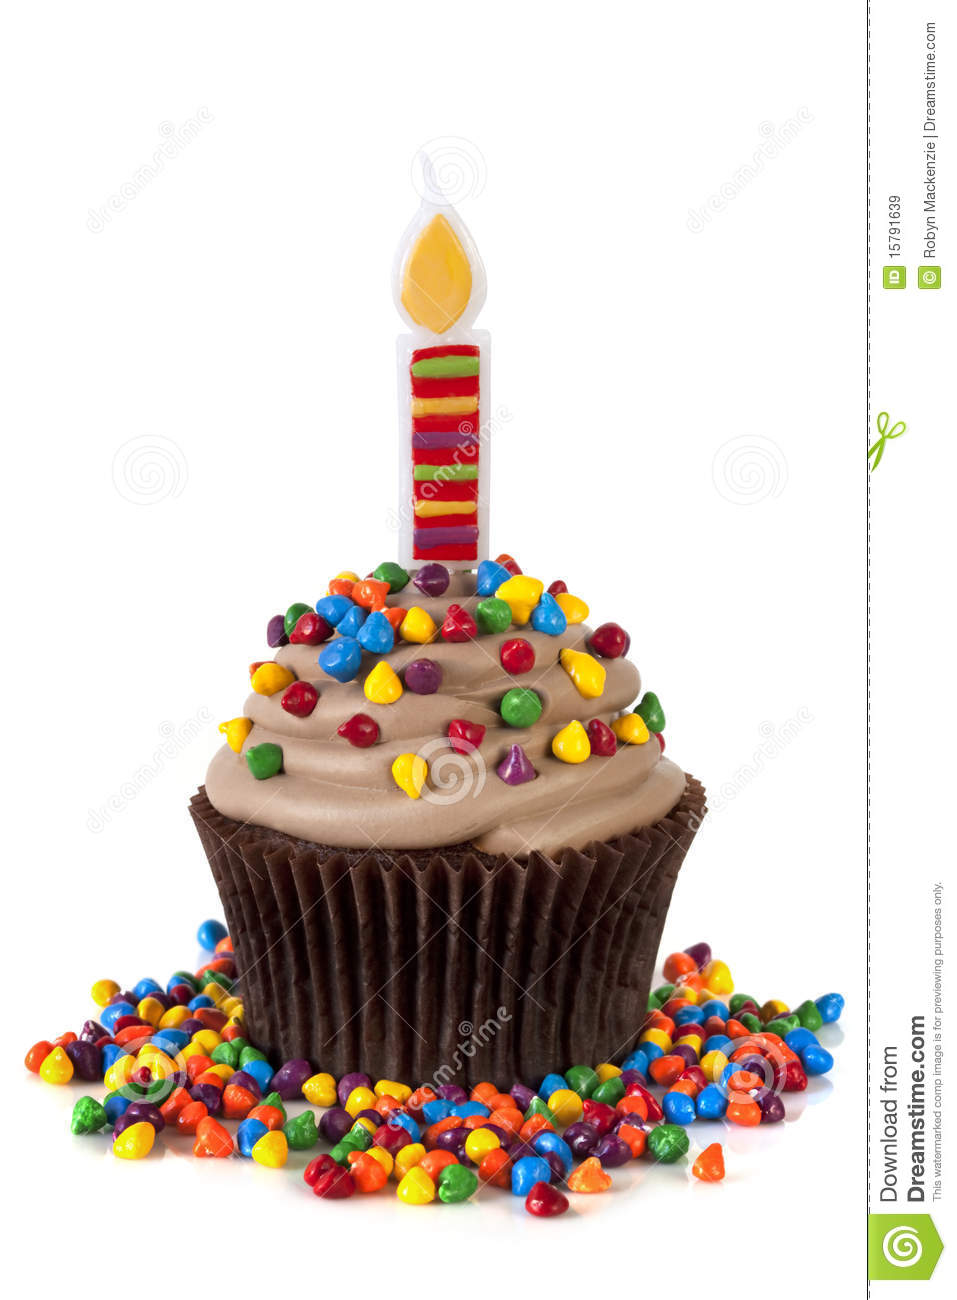 Cupcake With Candle Royalty Free Stock Images   Image  15791639